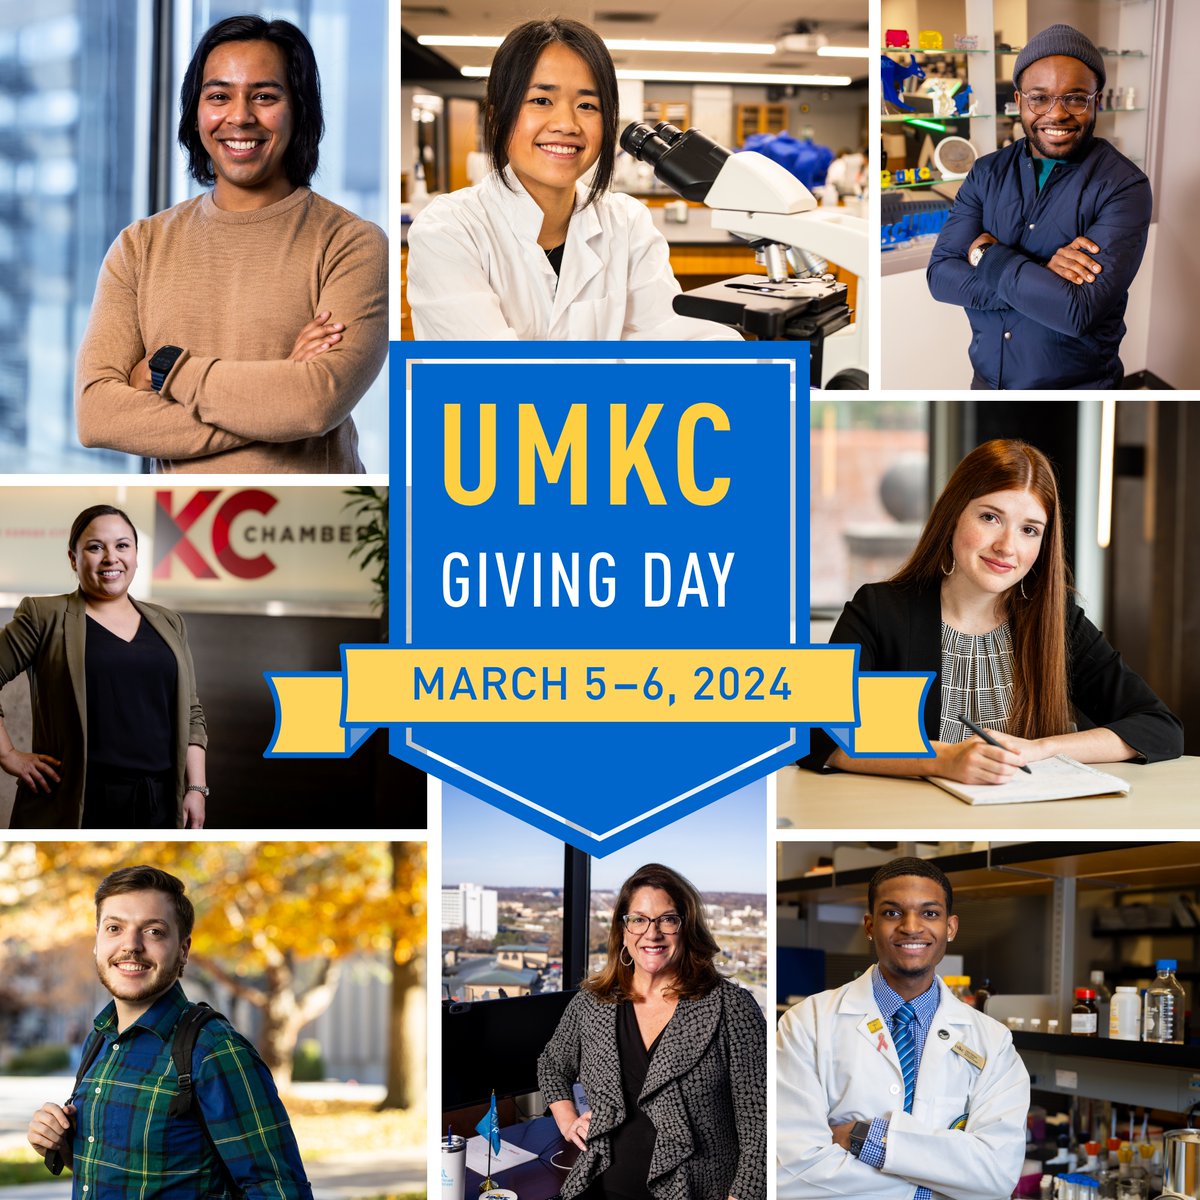 It's Giving Day! Join us for our 24-hour fundraising event and consider donating to one of several School of Medicine causes below. fundraise.givesmart.com/vf/UMKC